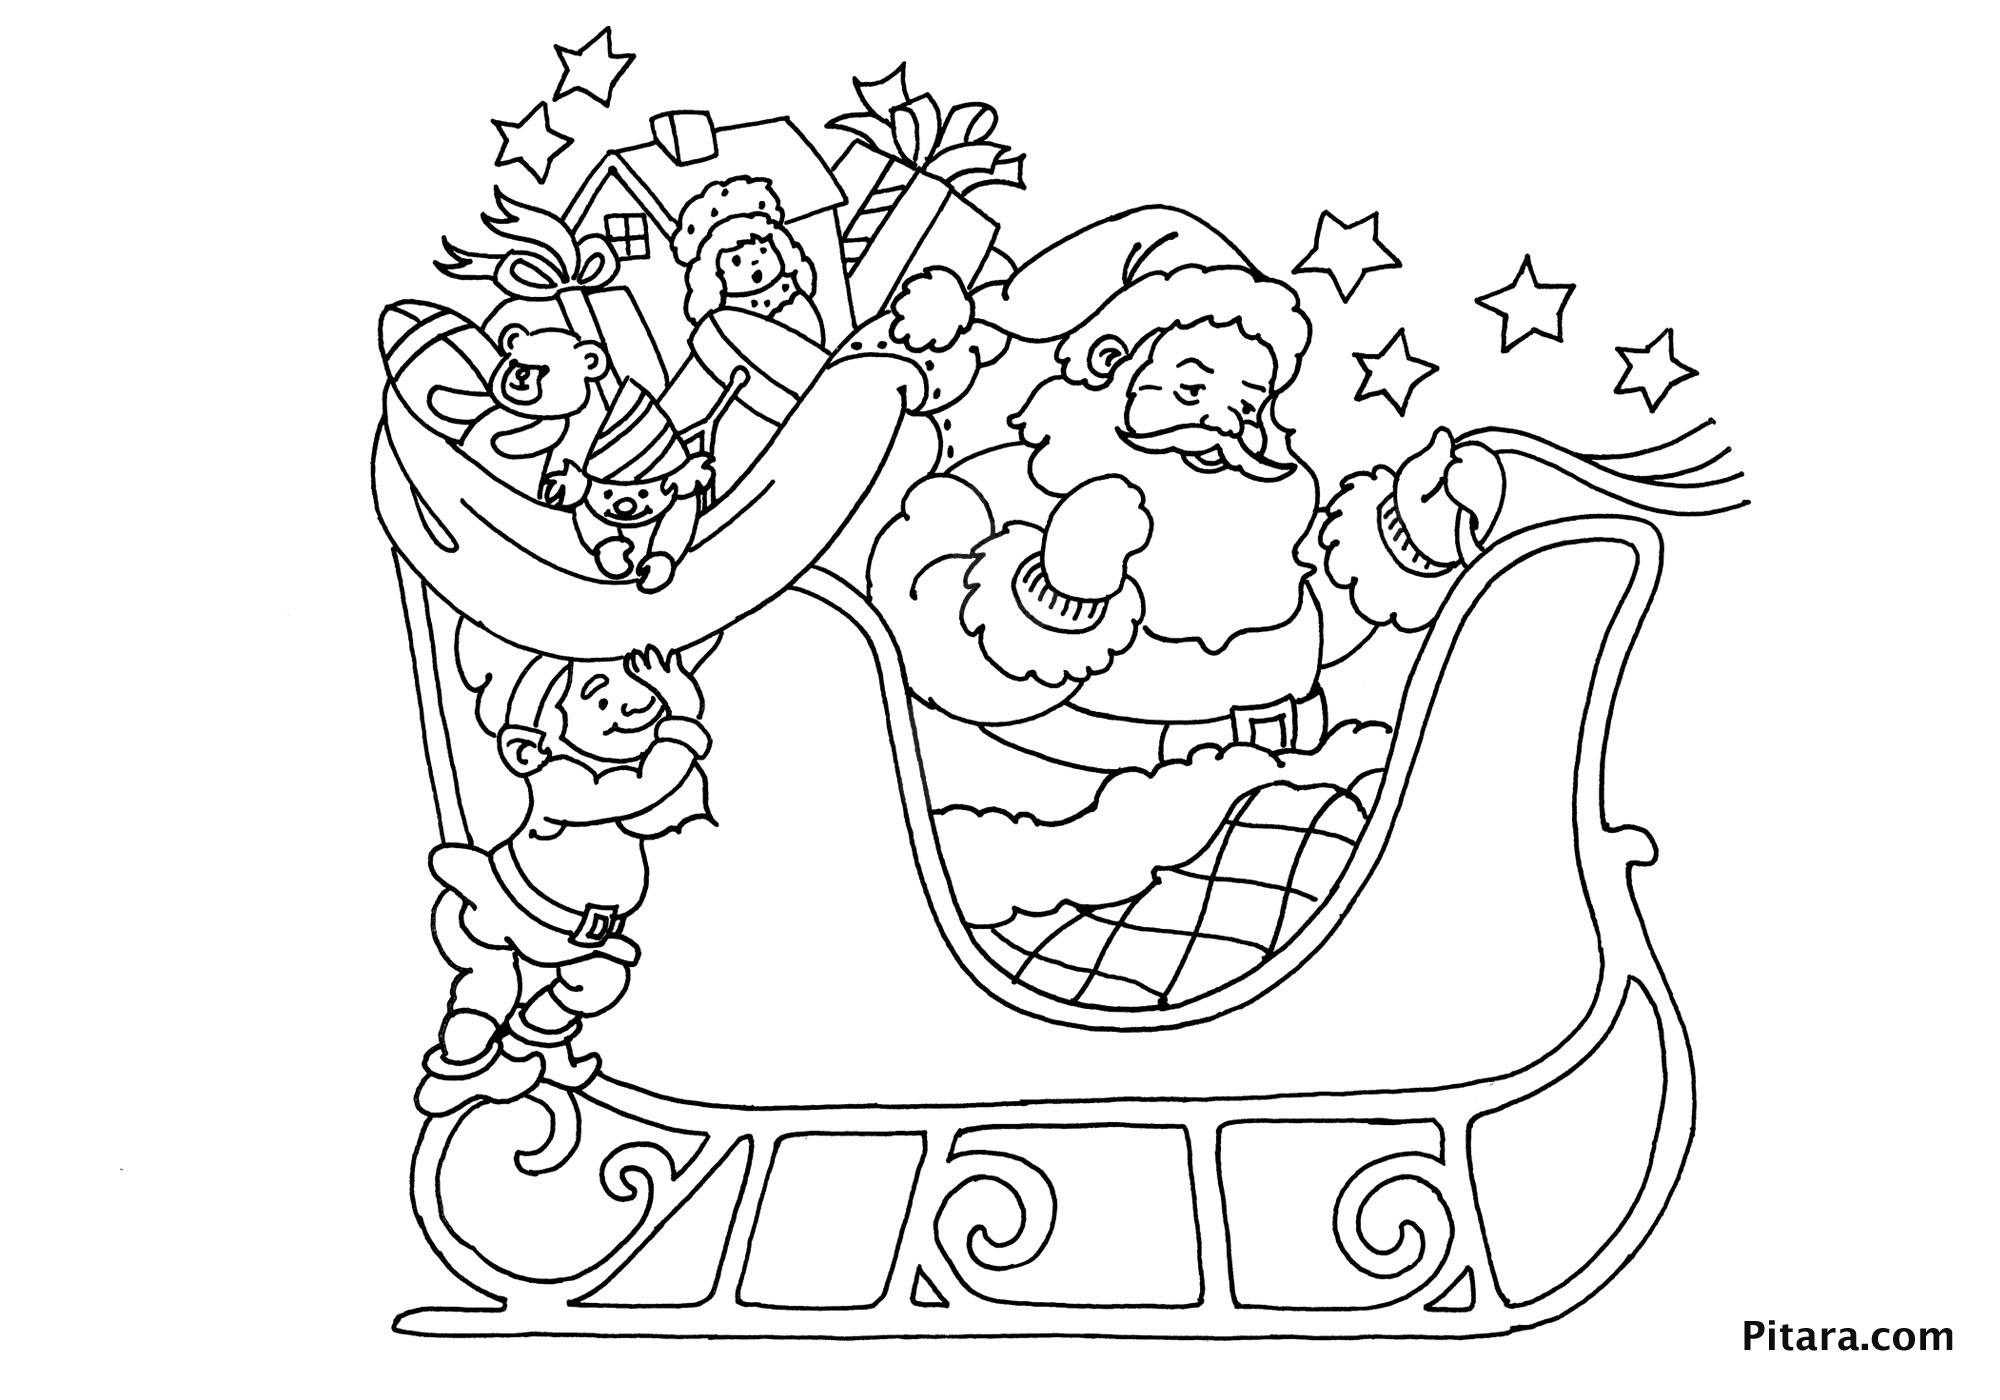 Santa Sleigh - Free Colouring Pages